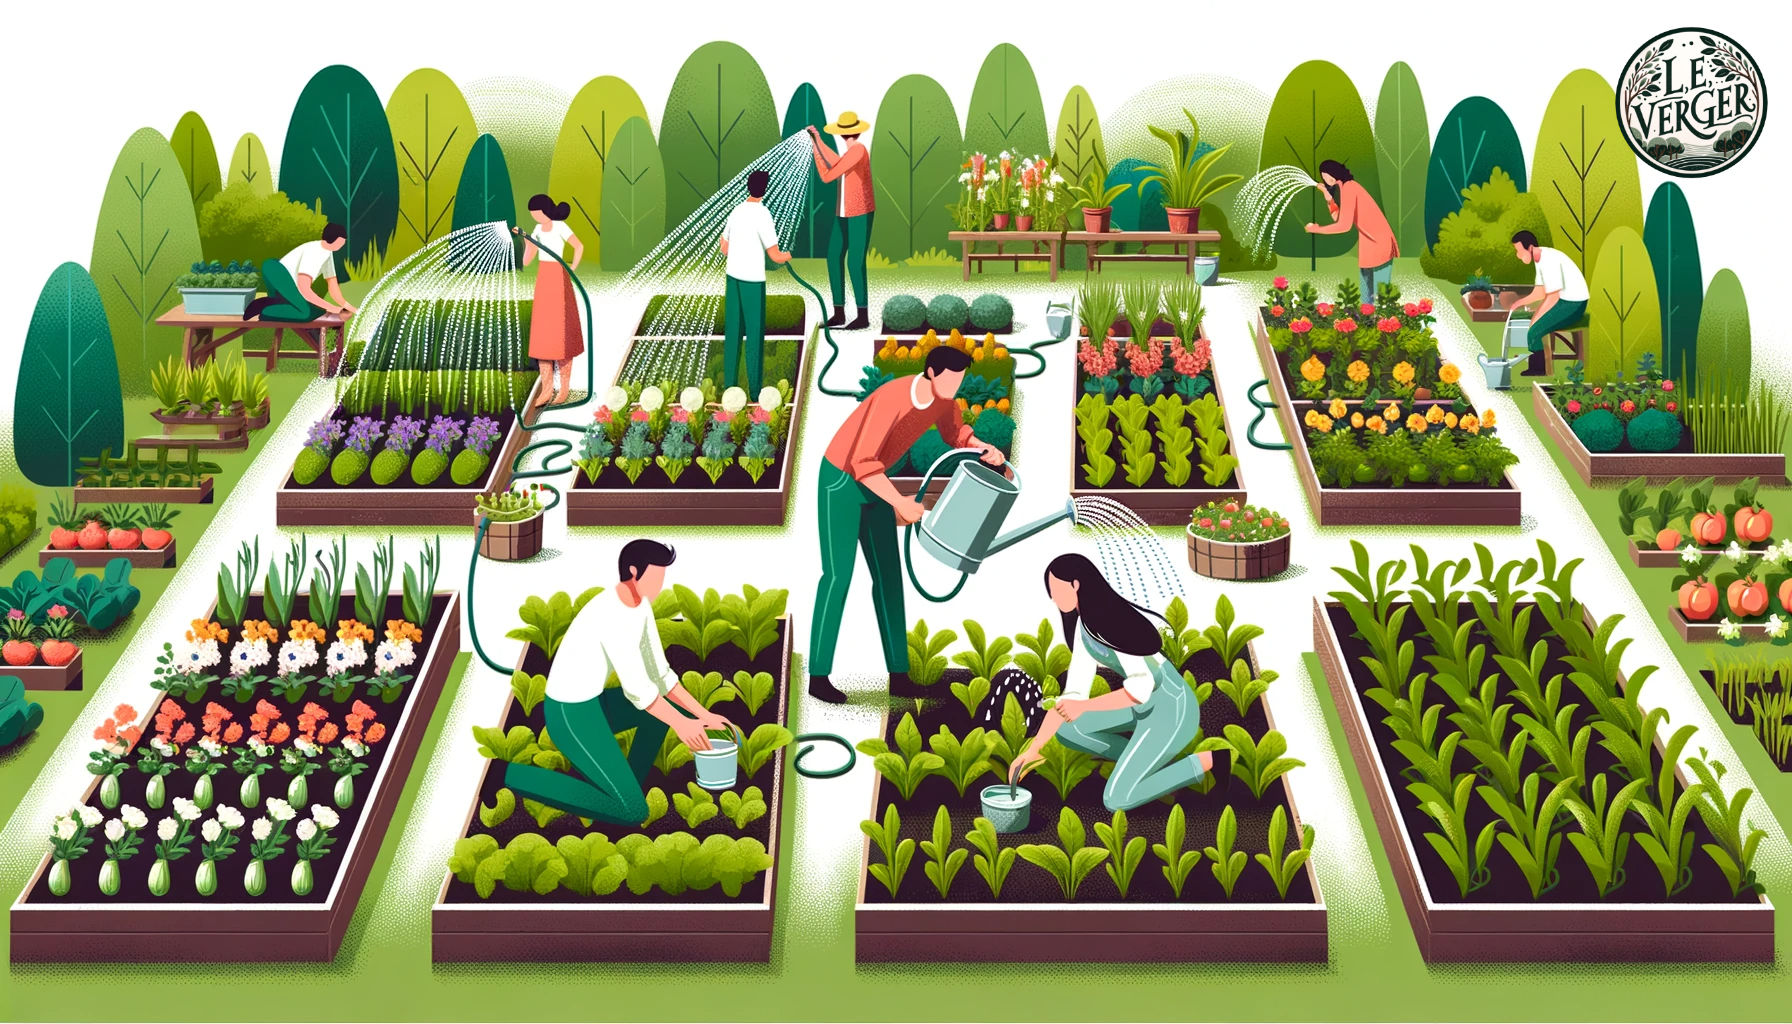 Improving Water and Soil Retention: Illustration, wide aspect: A lush garden landscape with raised beds full of vegetables and flowers. Diverse individuals are engaged in gardening activities. One is adjusting a sprinkler, another is examining a plant's leaves, while a third pours water into a plant saucer.